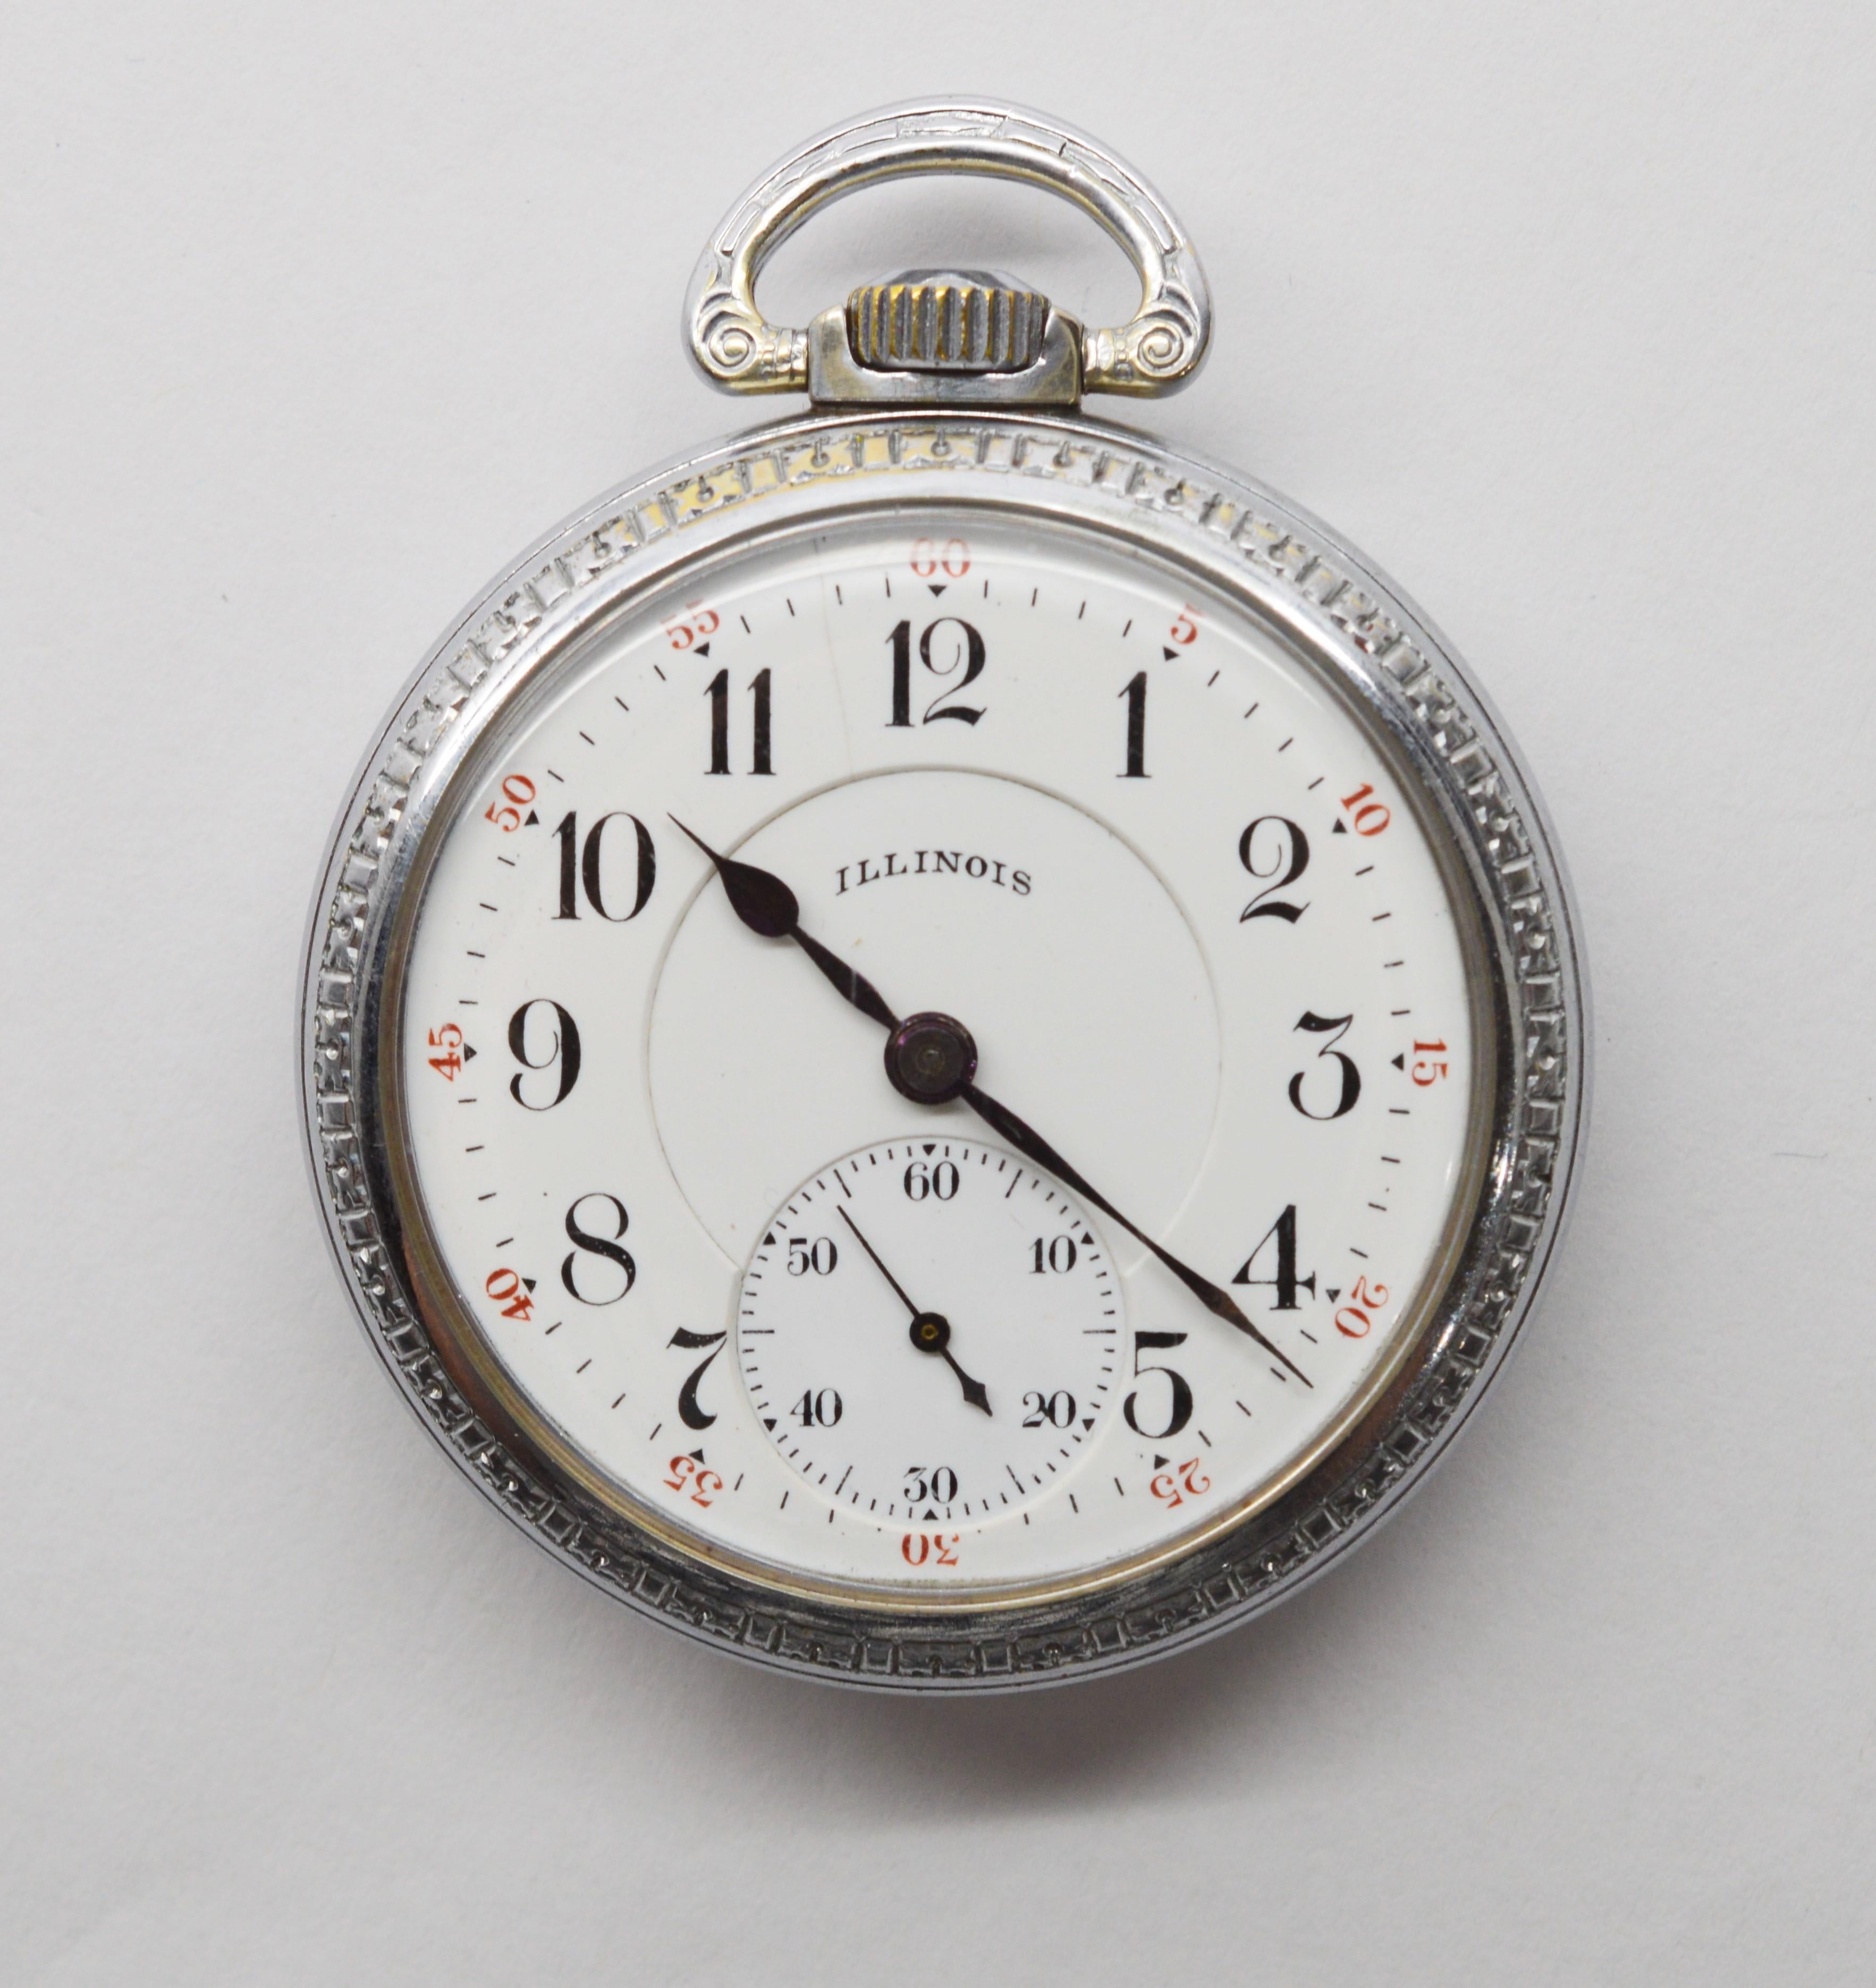 Men's Illinois Steel Pocket Watch with Display Back